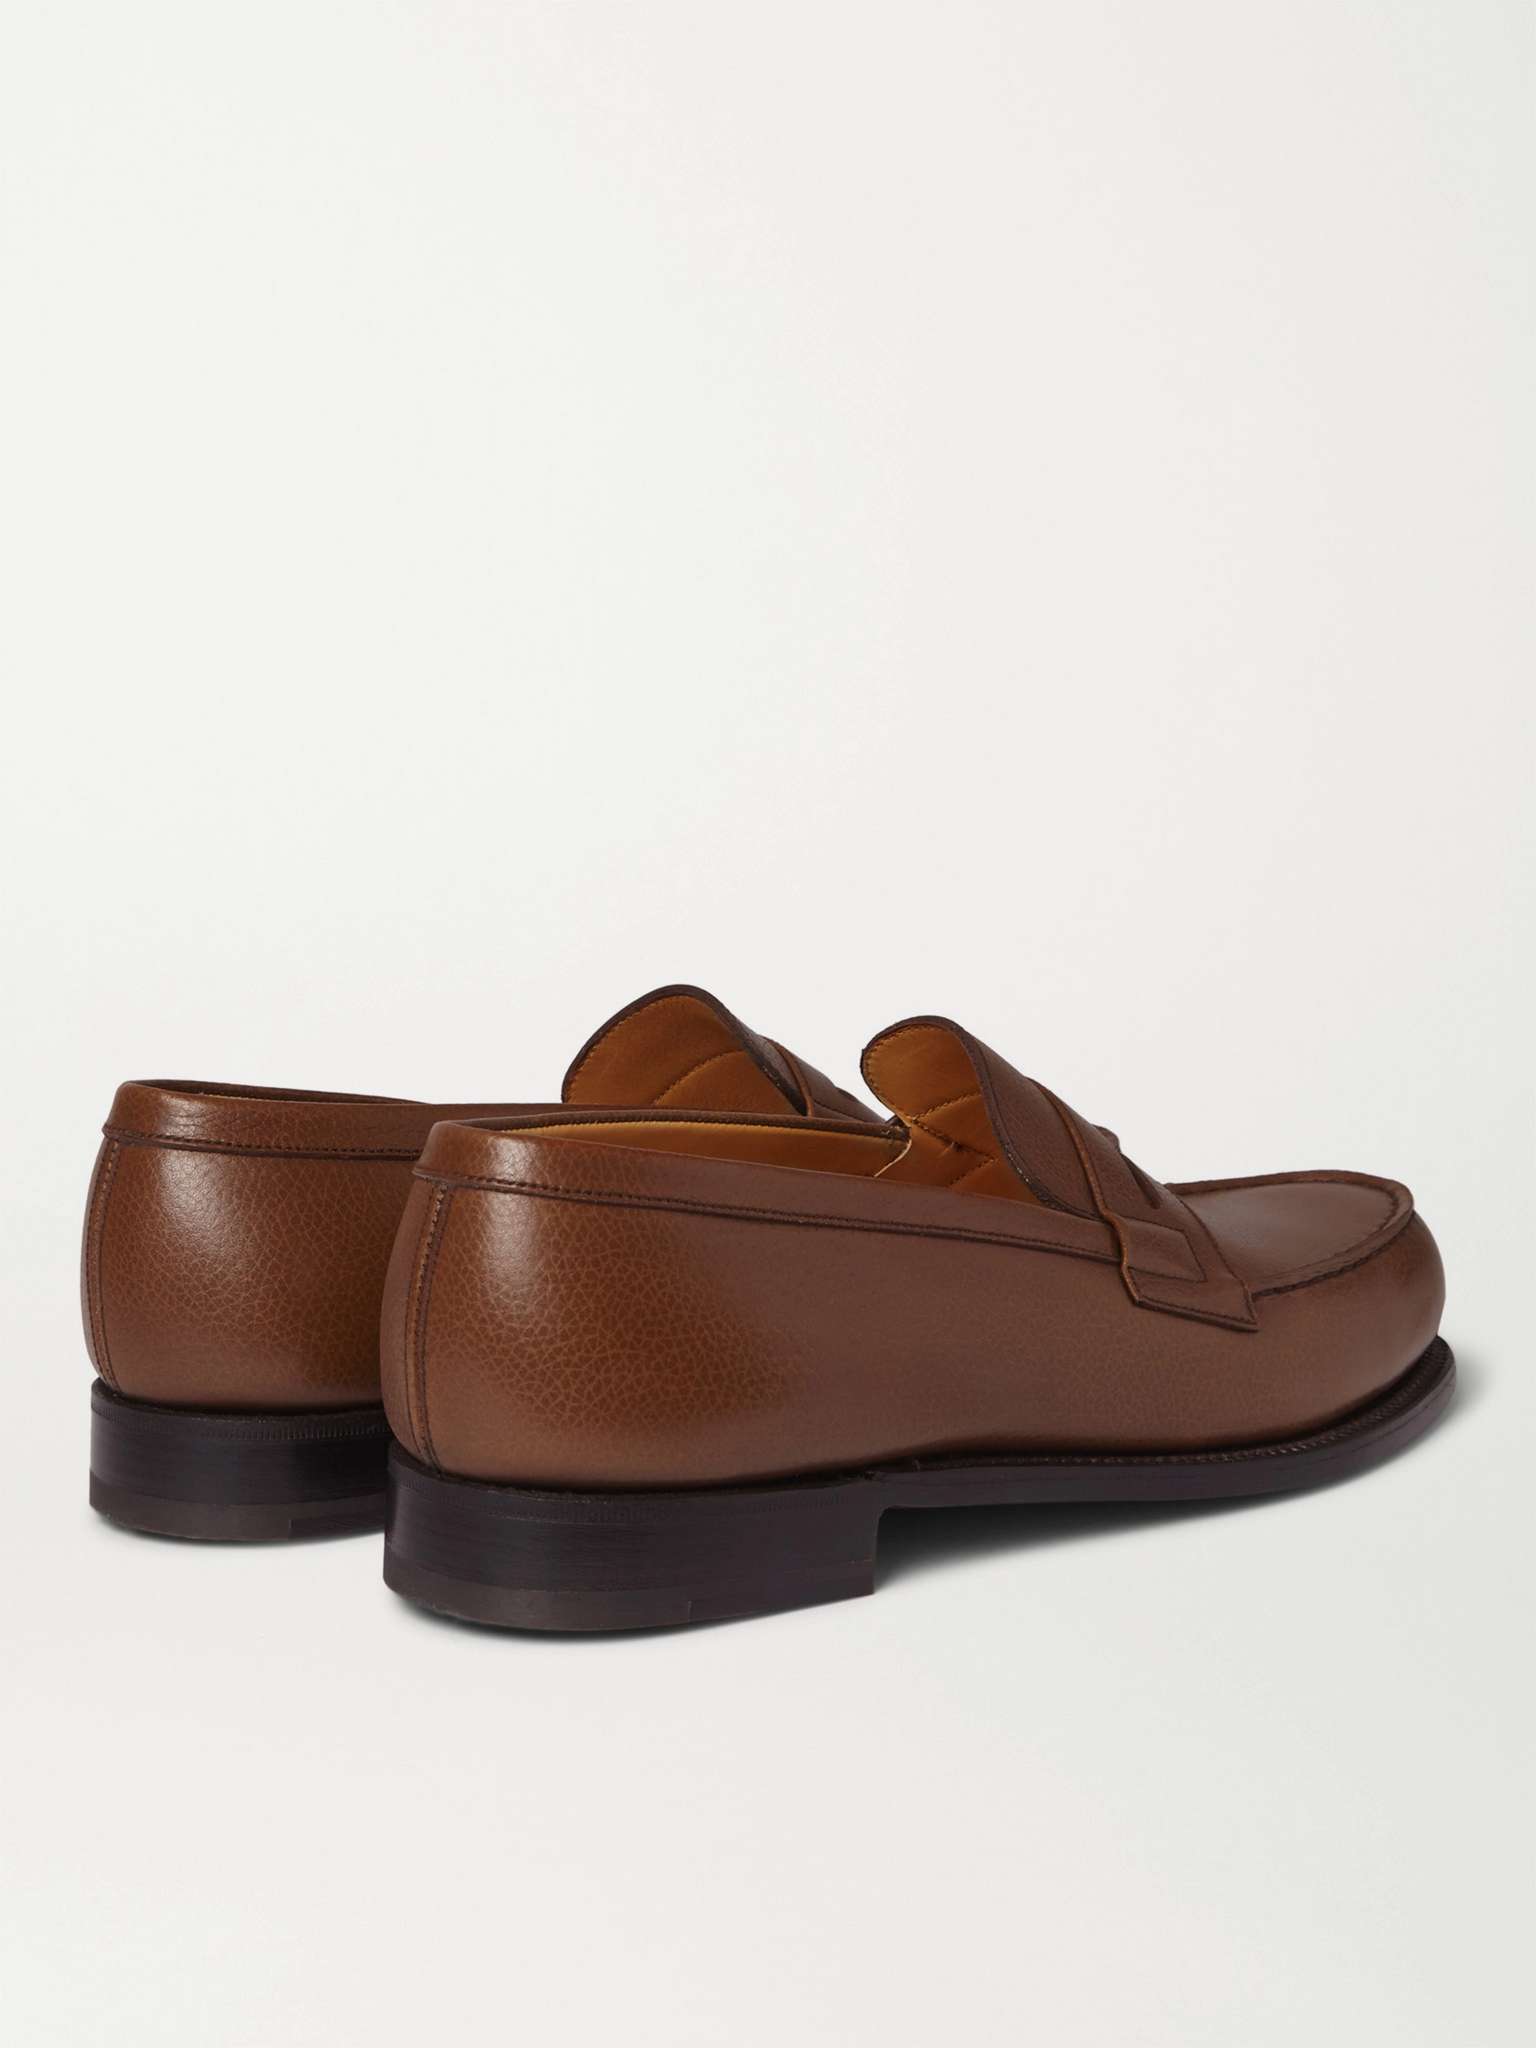 Brown 180 Moccasin Grained-Leather Loafers | J.M. WESTON | MR PORTER